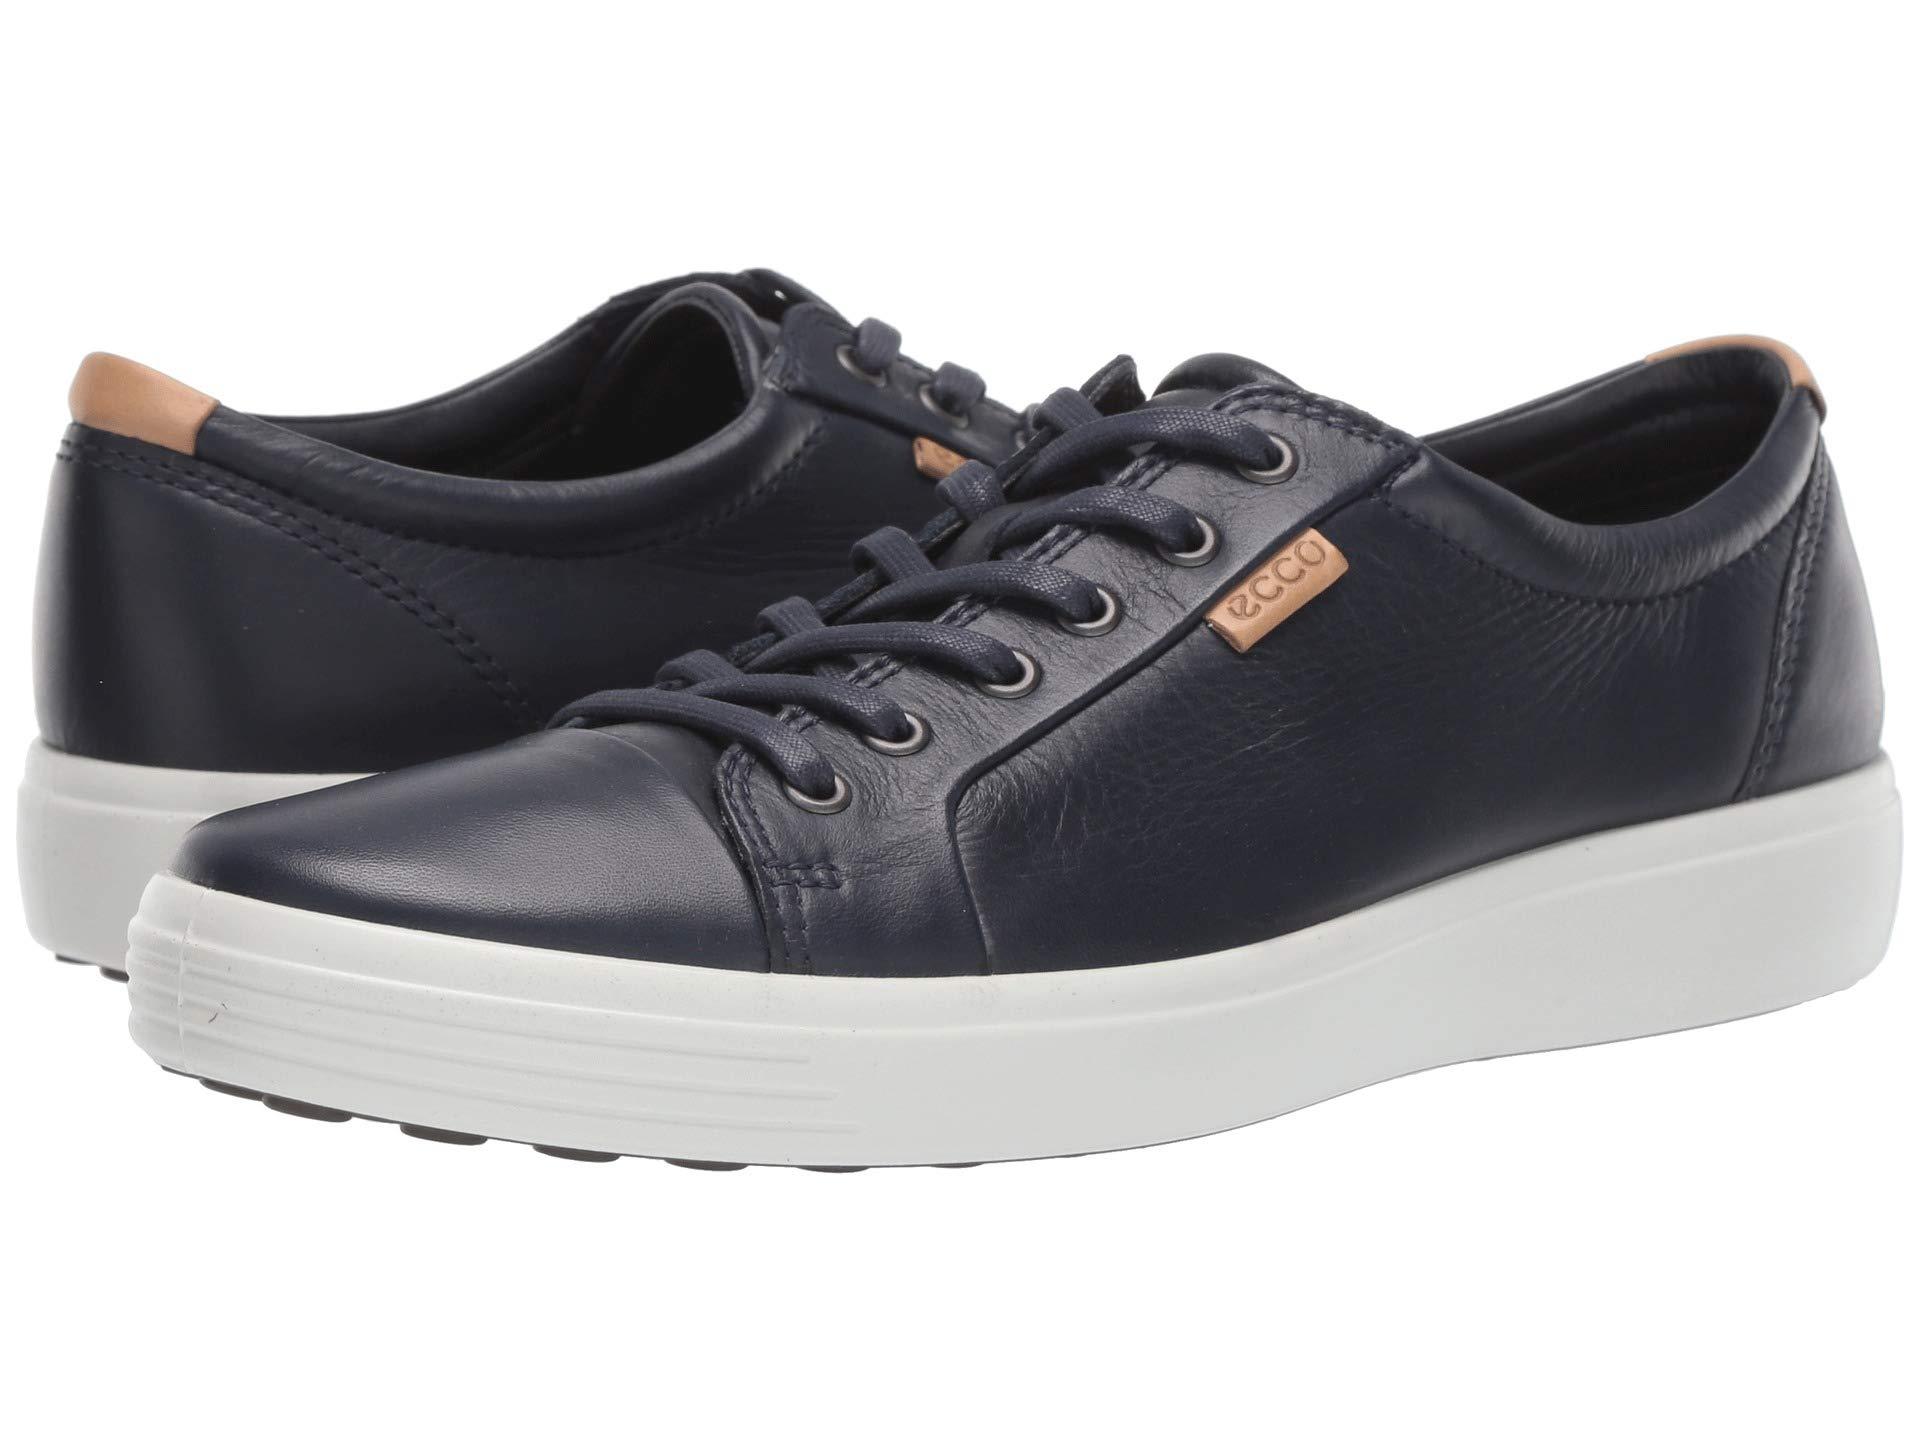 Ecco Leather Soft 7 Light Sneaker in Navy (Blue) for Men - Save 10% - Lyst